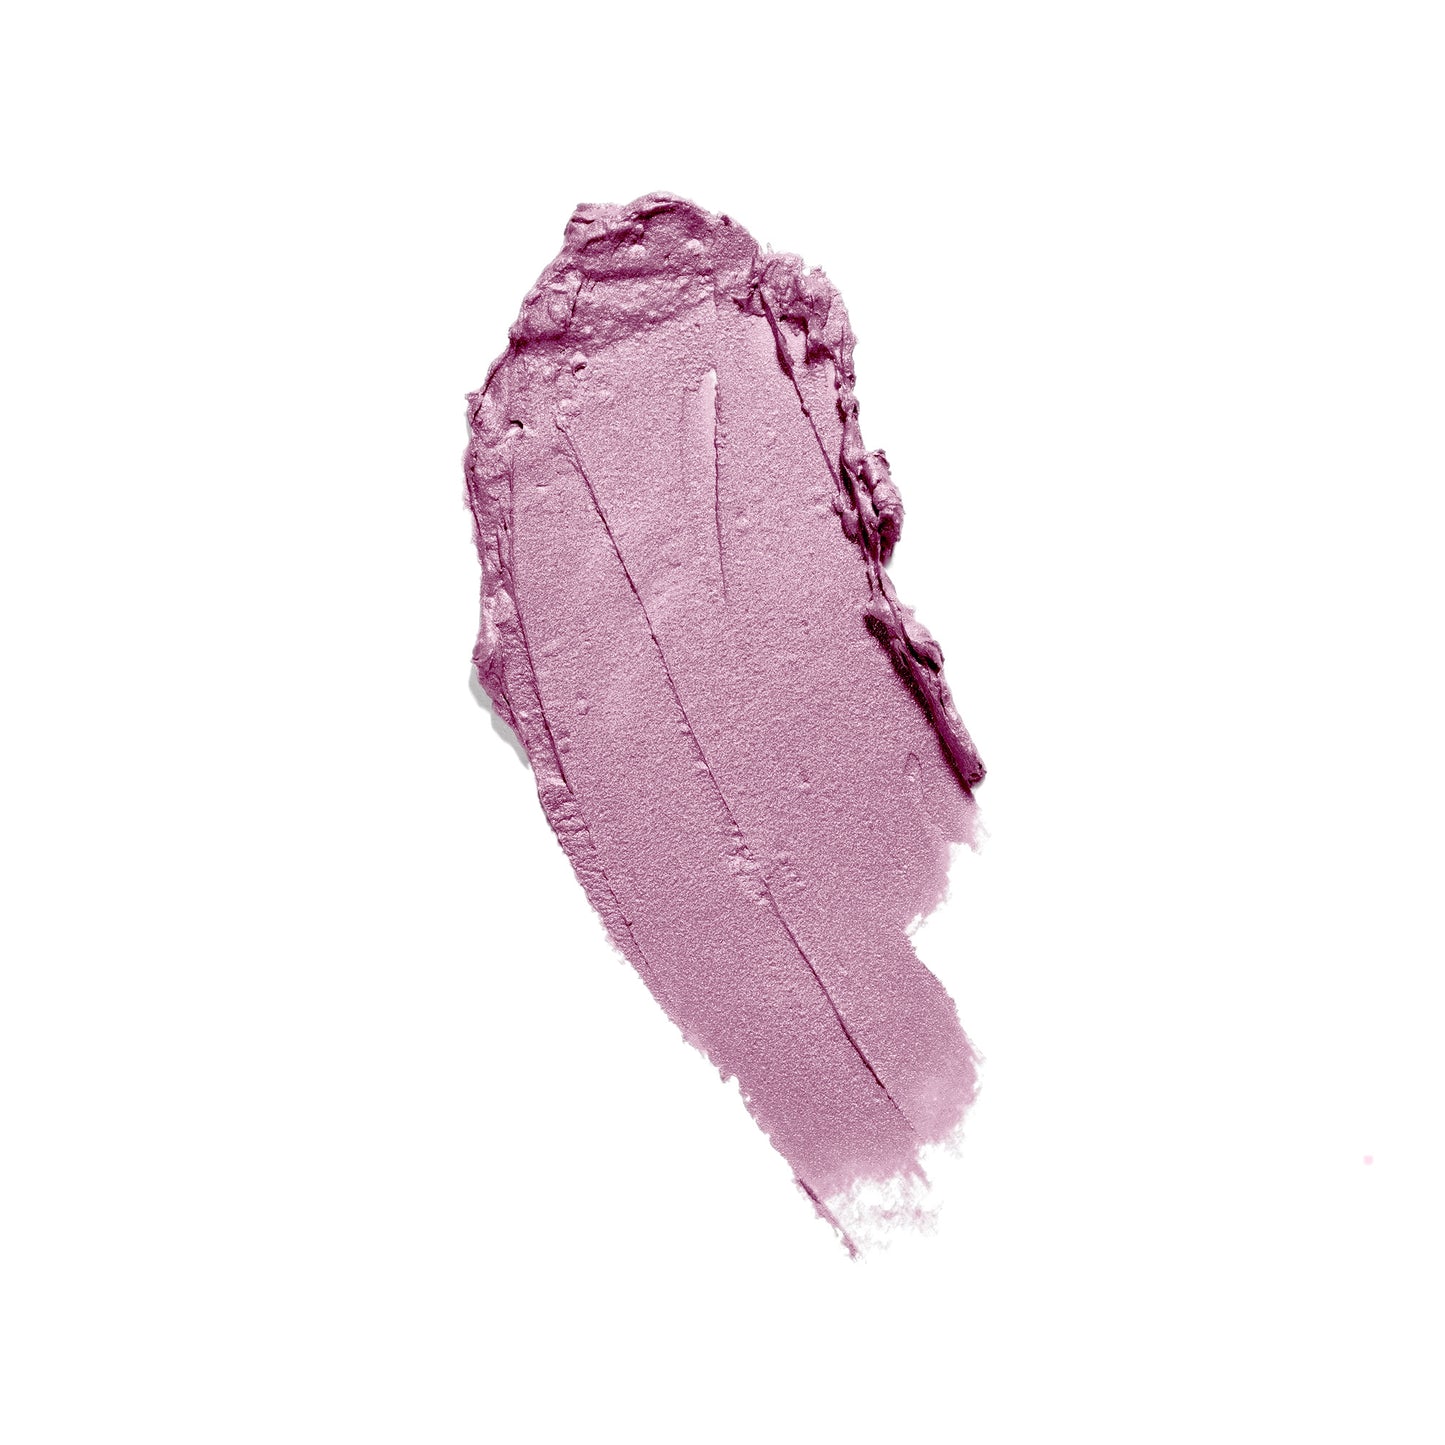 Satin lipstick with a vibrant rose candy hue and smudge detail from Natural-Cruelty-Free line